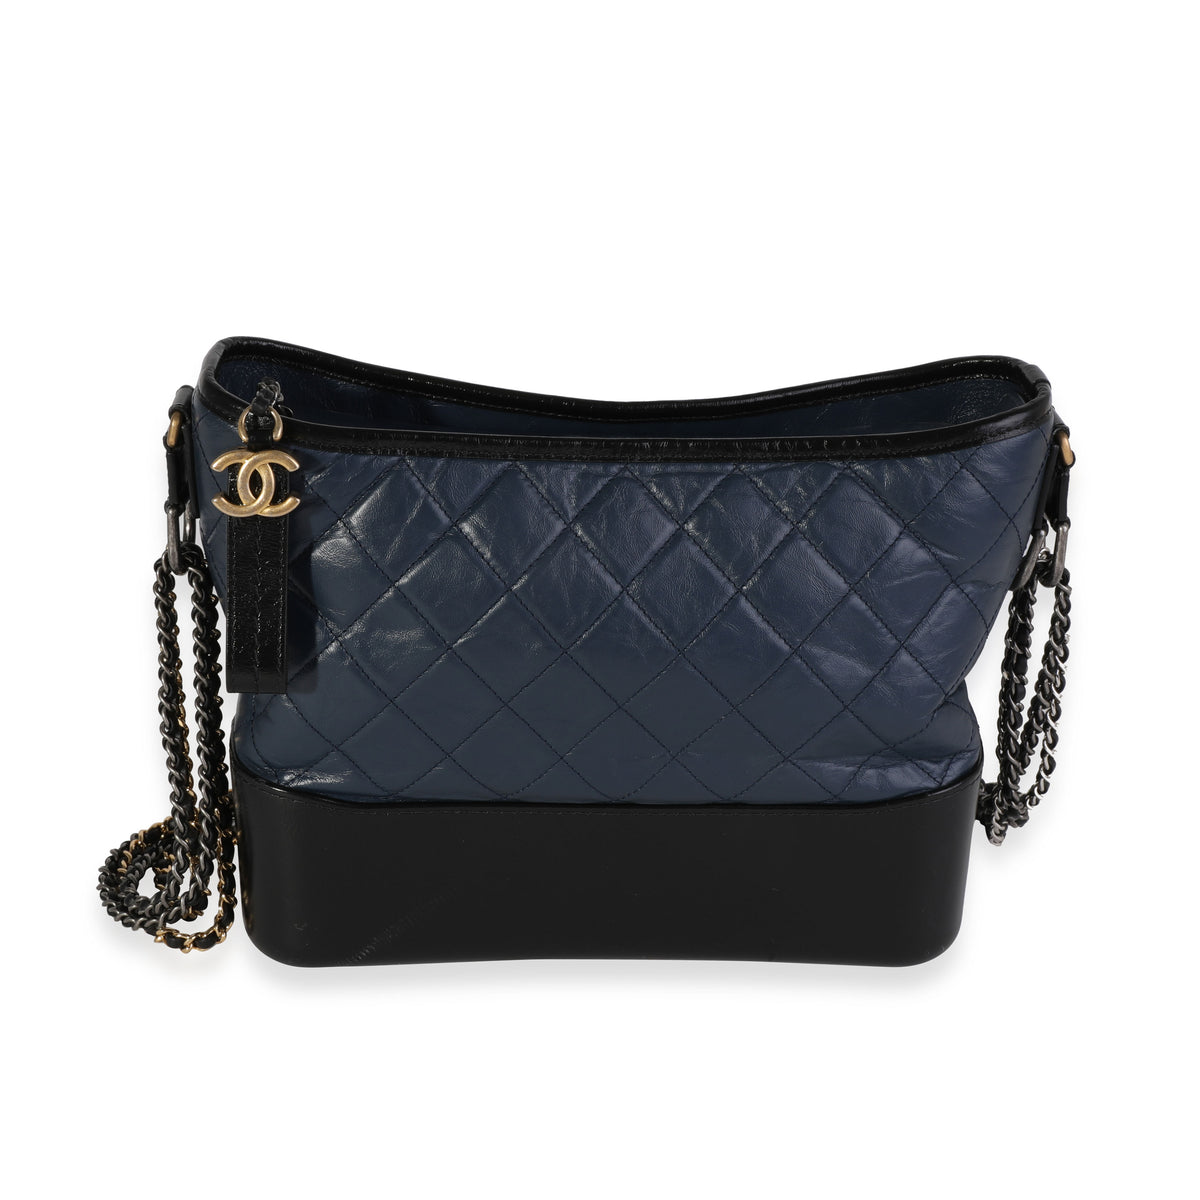 CHANEL Gabrielle Medium Quilted Leather Hobo Bag Black/Blue